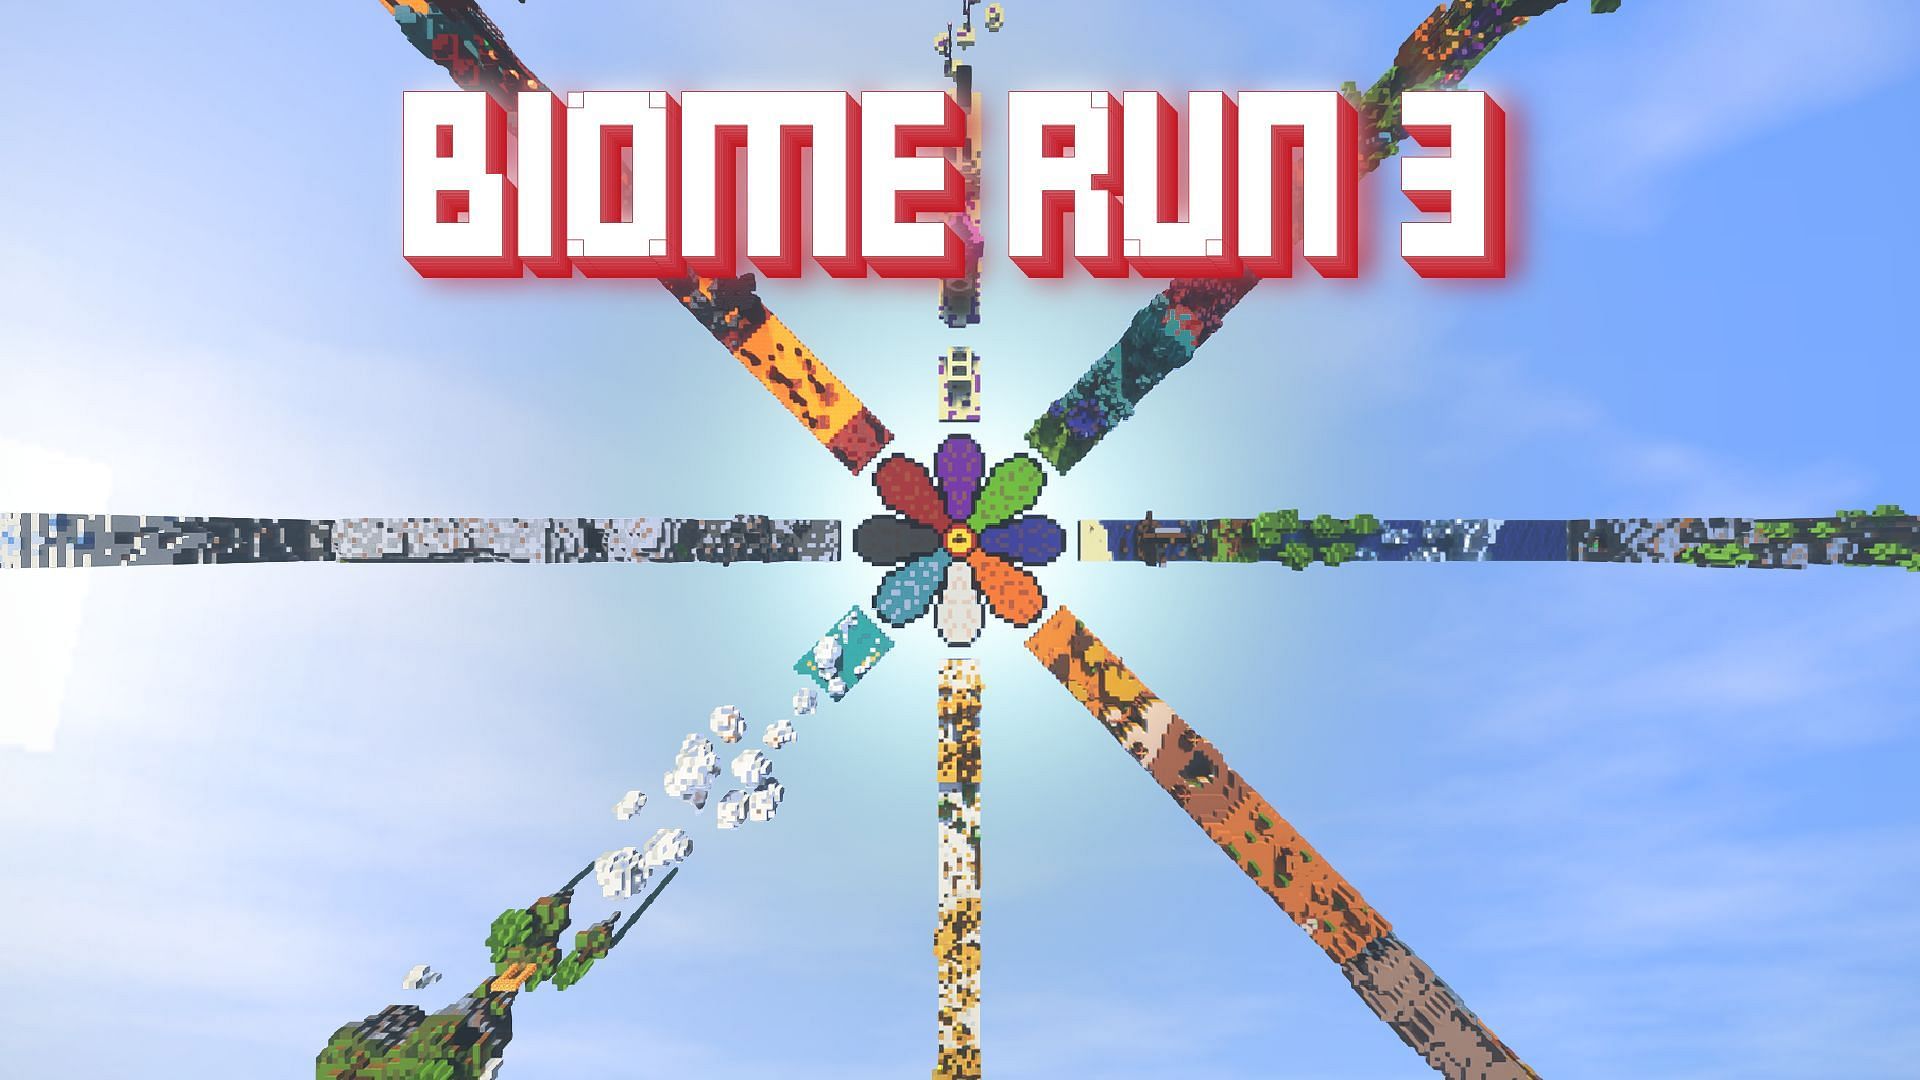 Biome Run 3 allows players to parkour through multiple Minecraft biomes in the same map (Image via Mojang)